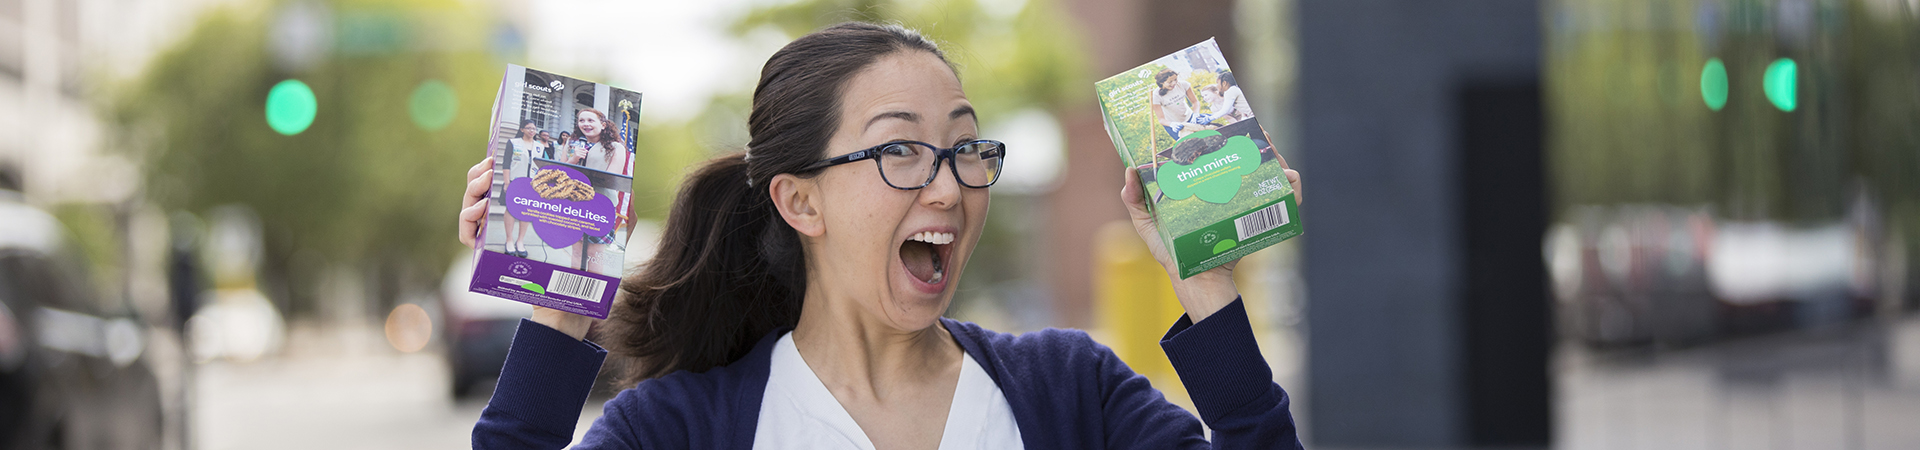  adult girl scout volunteer excitedly holding two girl scout cookie boxes 